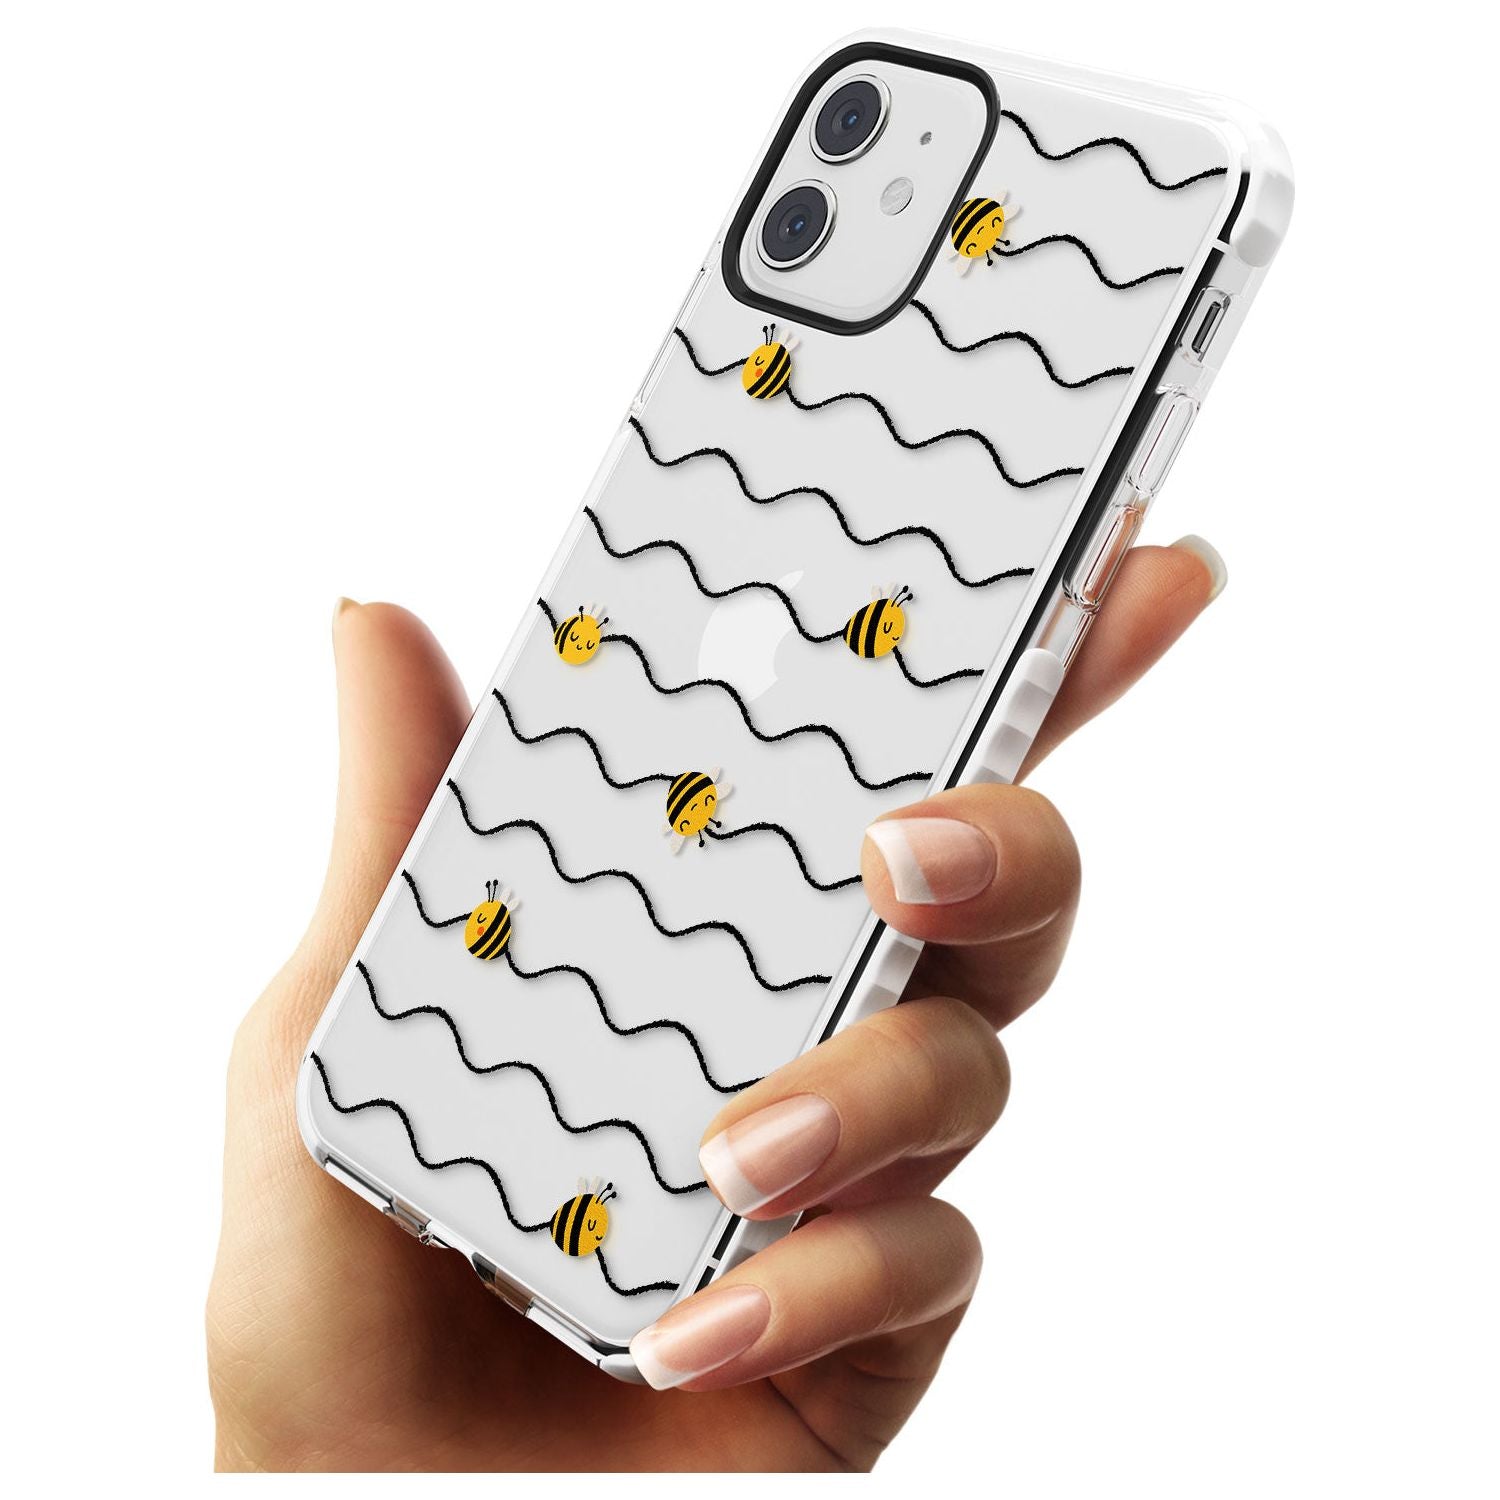 Sweet as Honey Patterns: Bees & Stripes (Clear) Impact Phone Case for iPhone 11